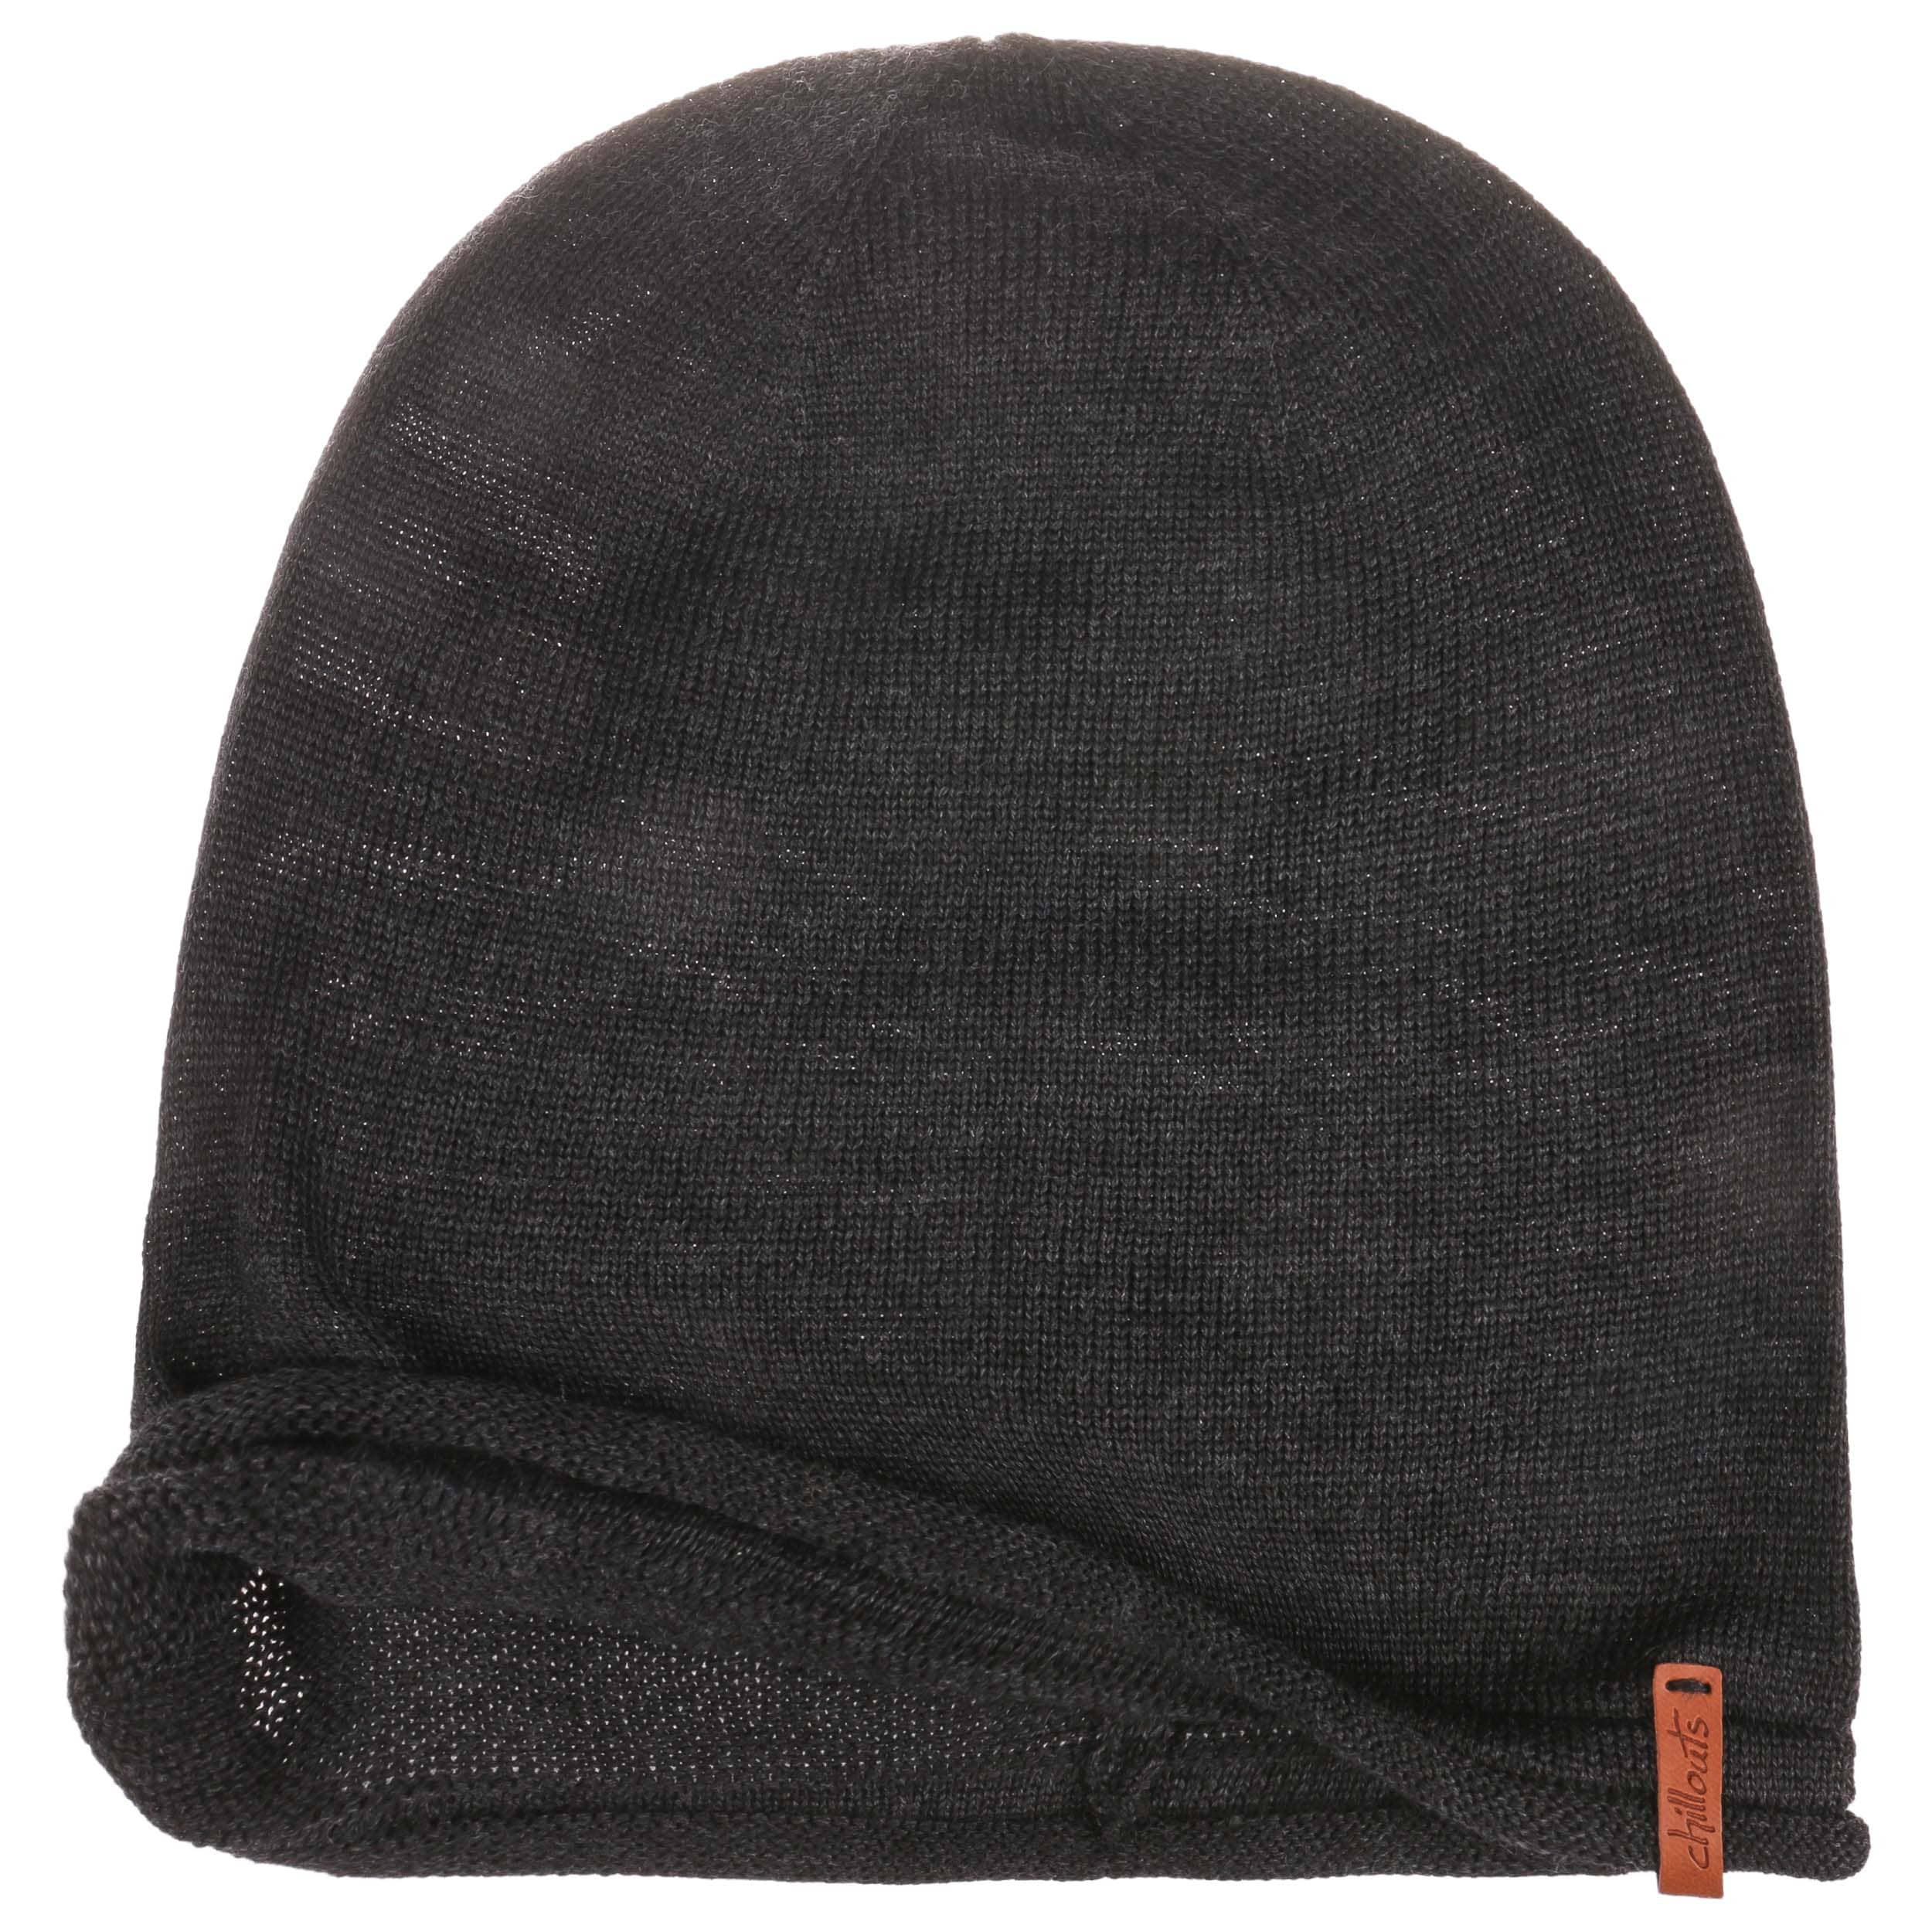 € 29,95 Leicester Beanie - Chillouts by Oversize